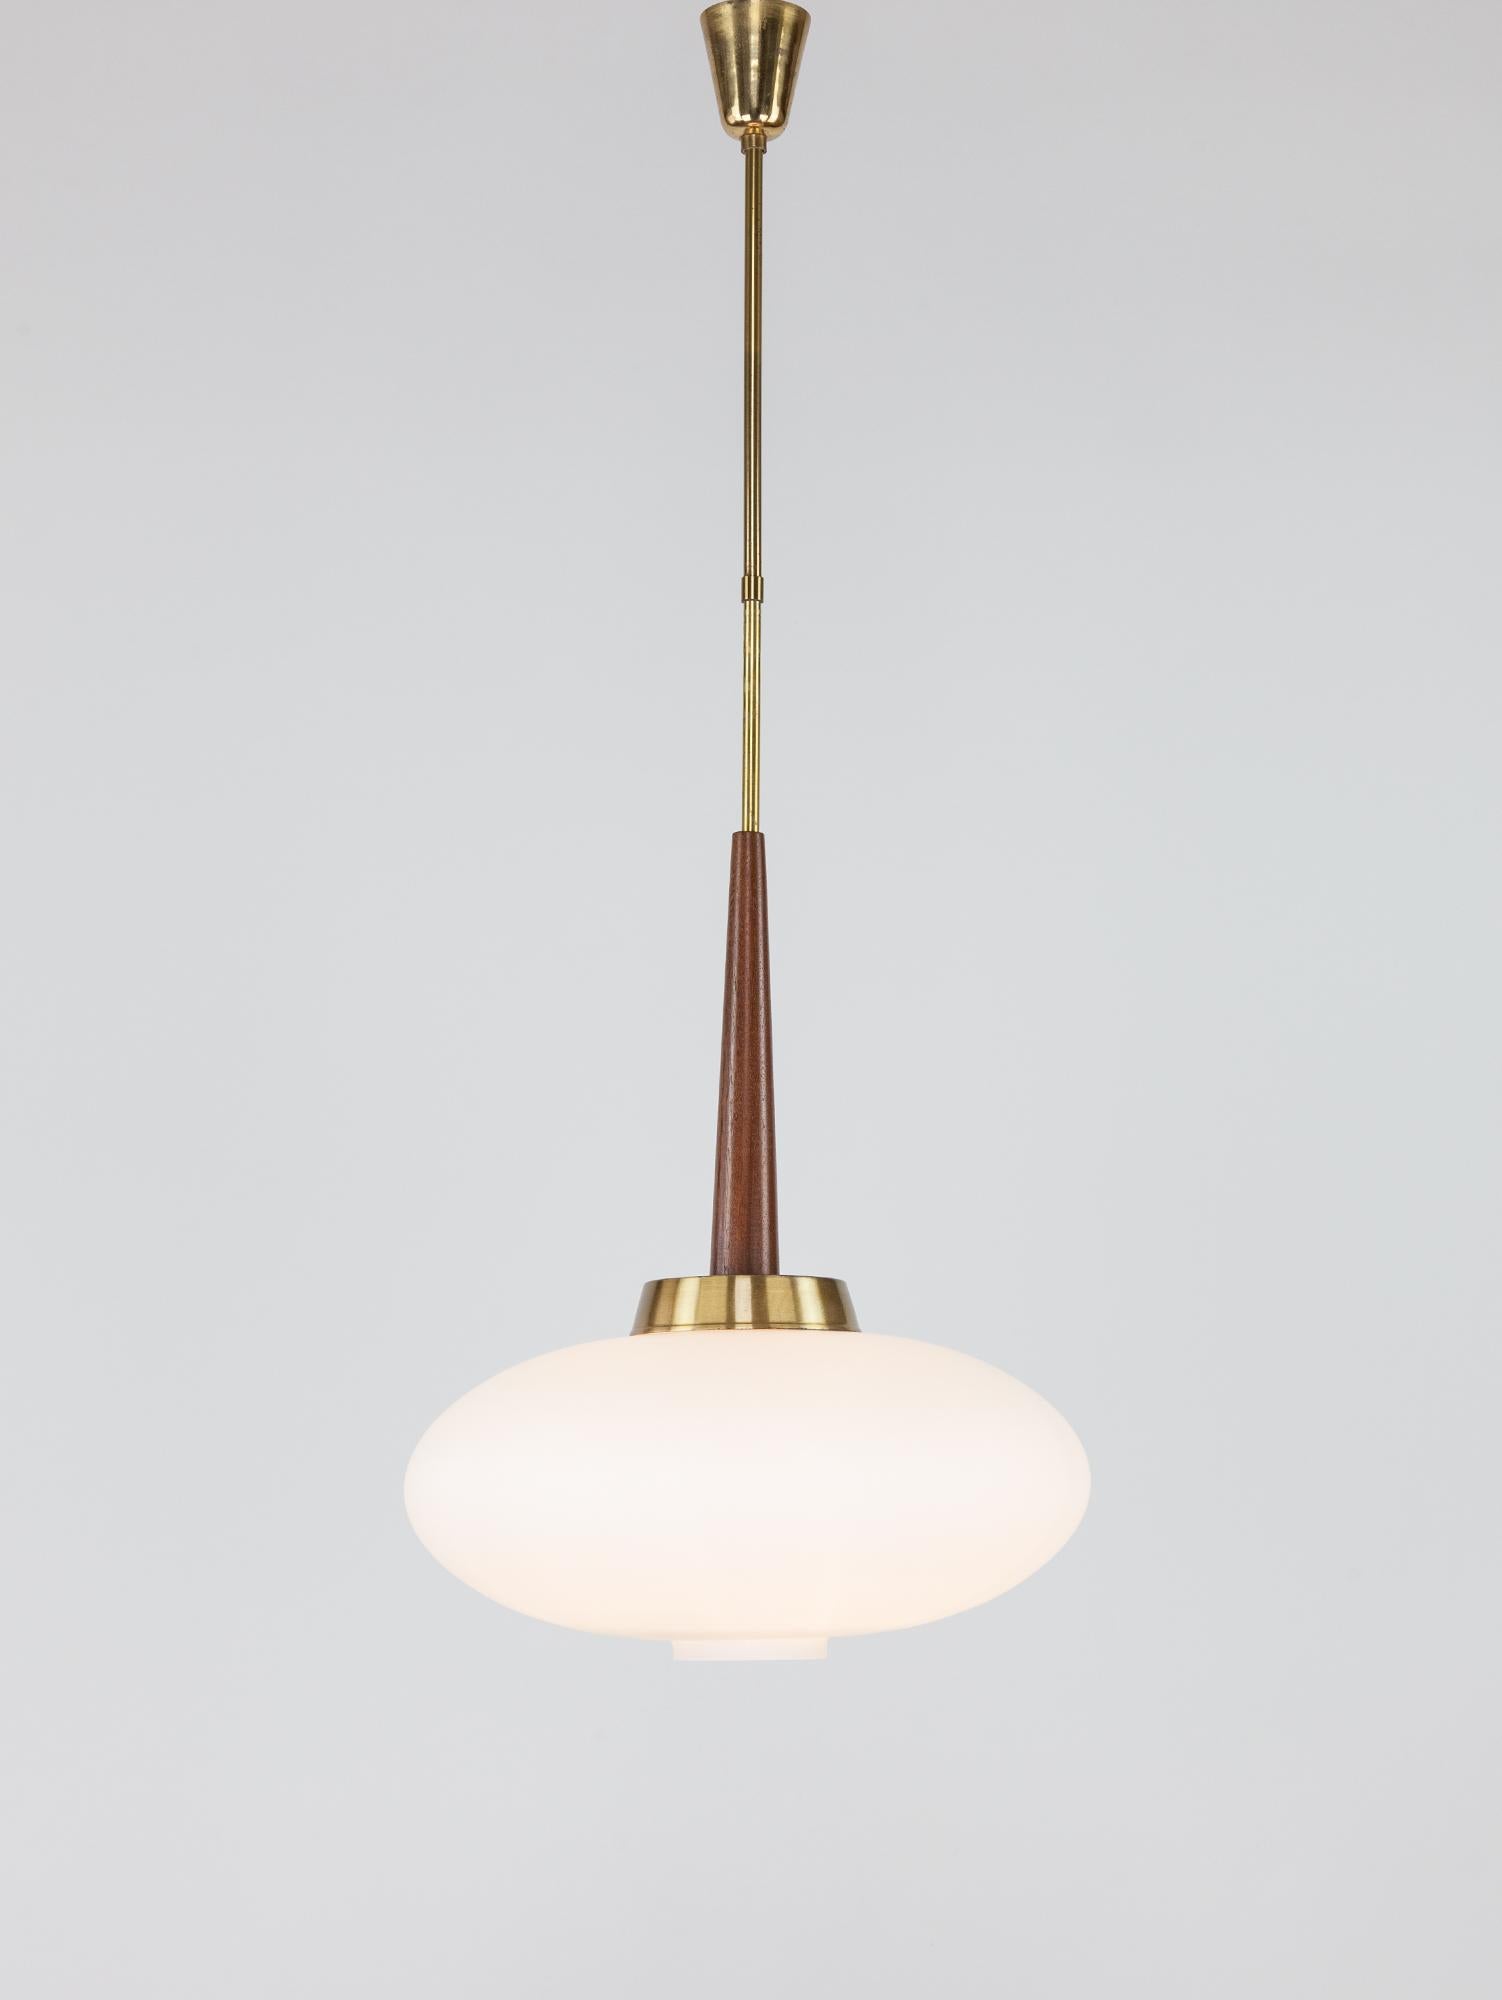 Stunning and rare vintage Italian modernist pendant. The white soft milky glass emphasizes the beautiful patina of the brass and the rich orange-brown of the teak detail. Elegant in its design, the pendant epitomizes classical Italian modernist